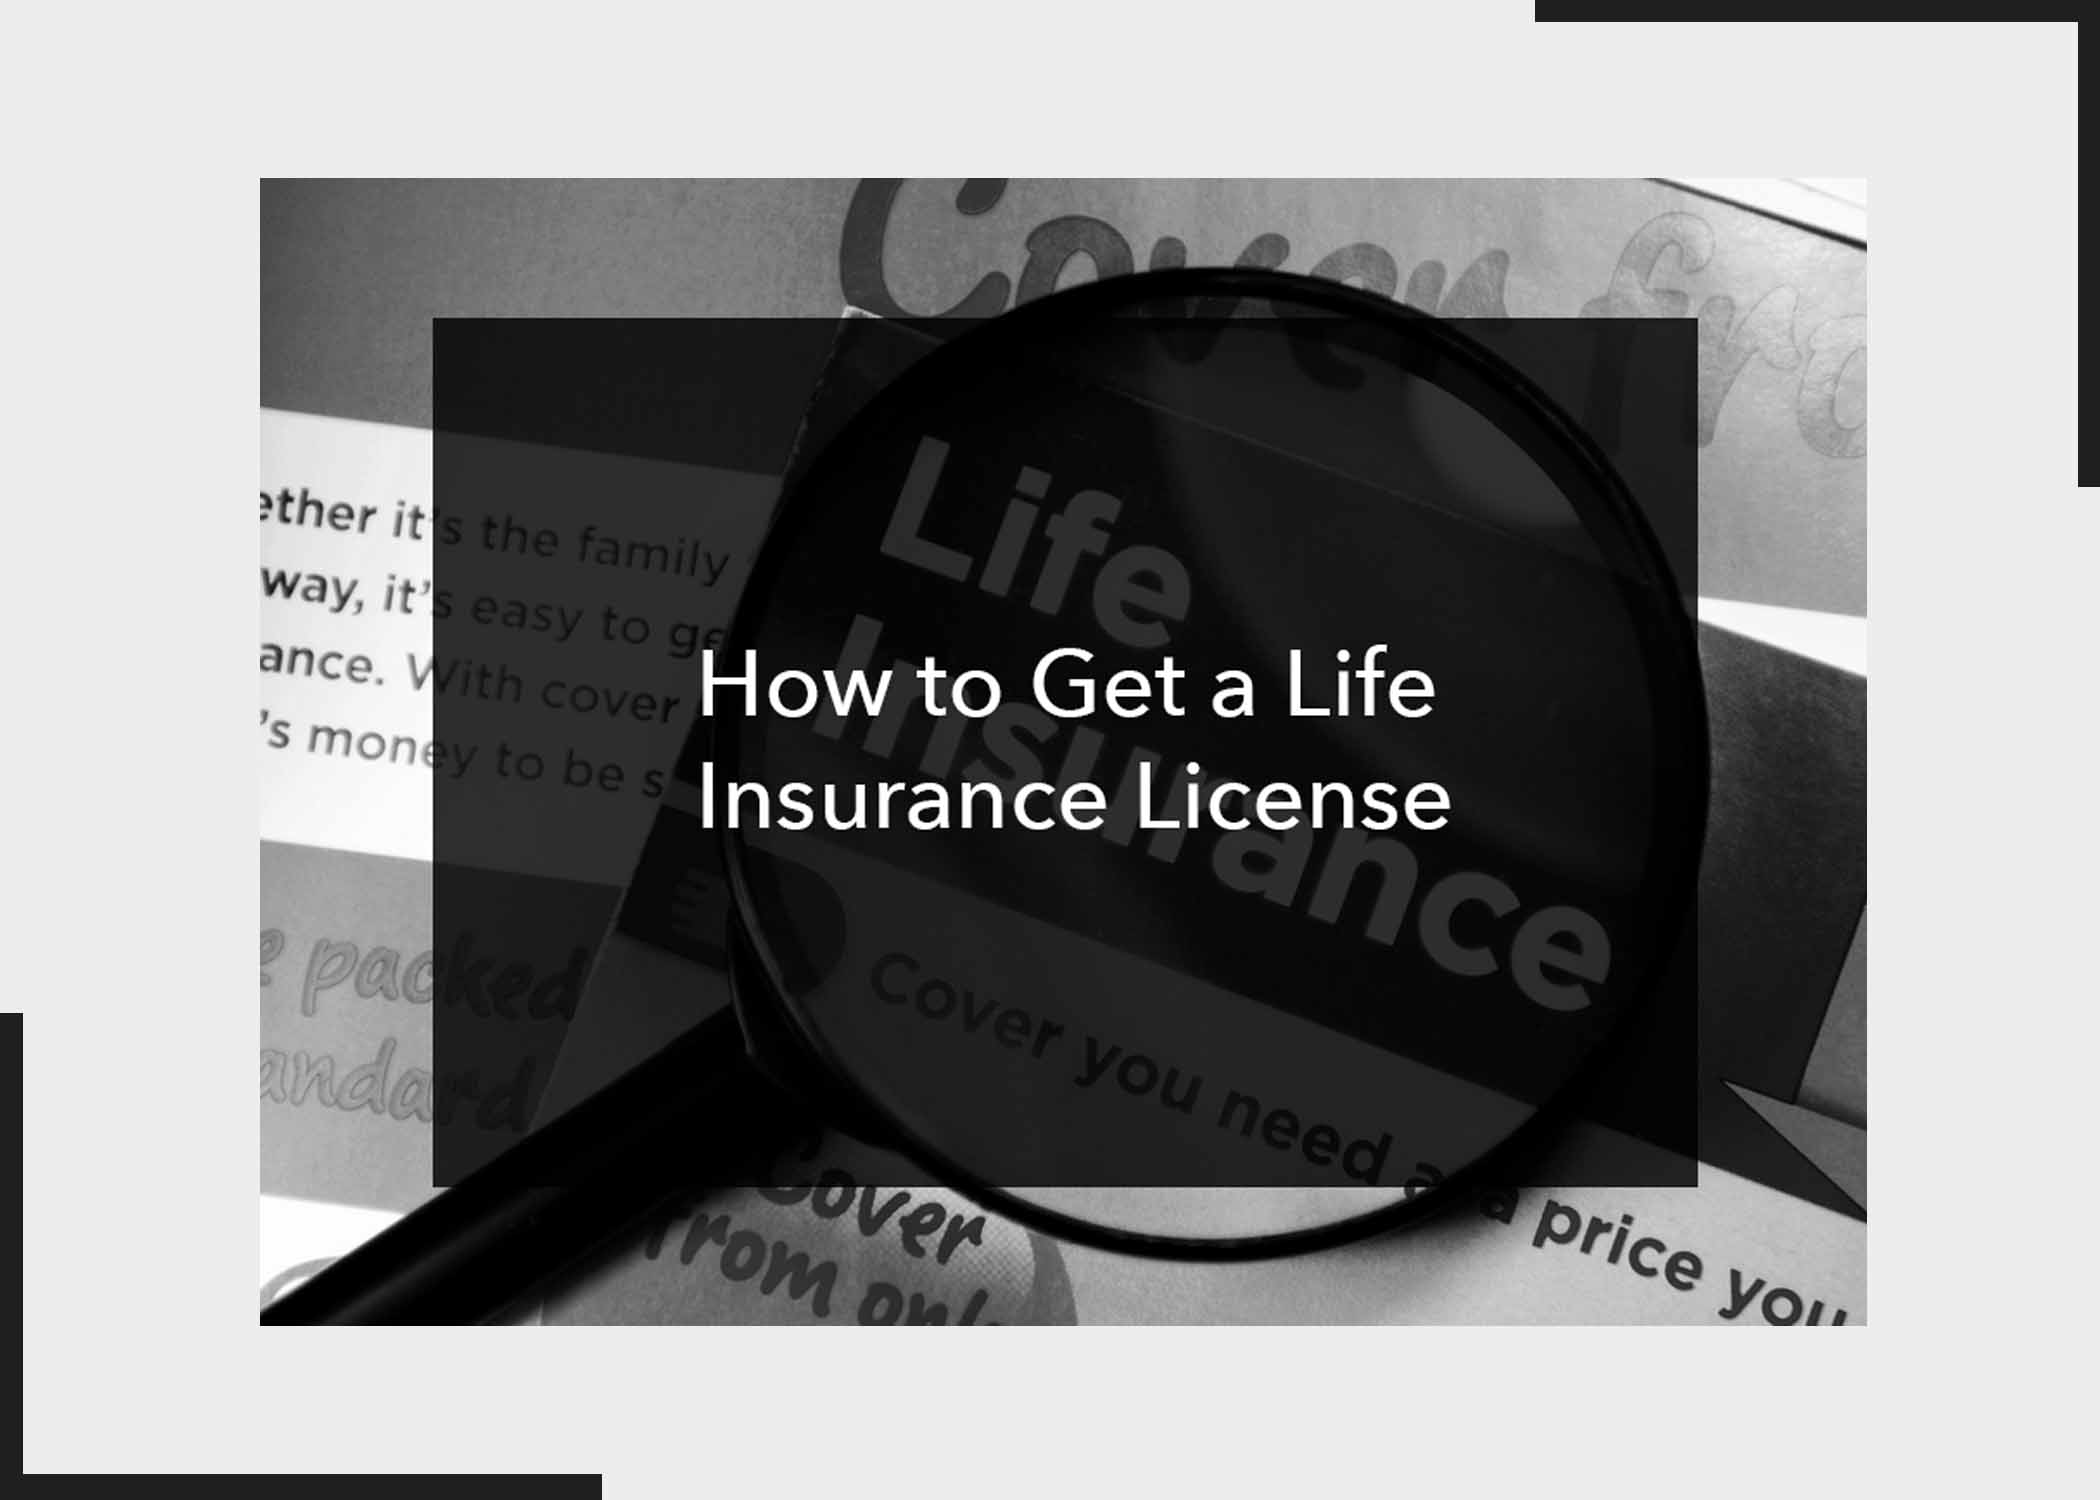 How to Get a Life Insurance License